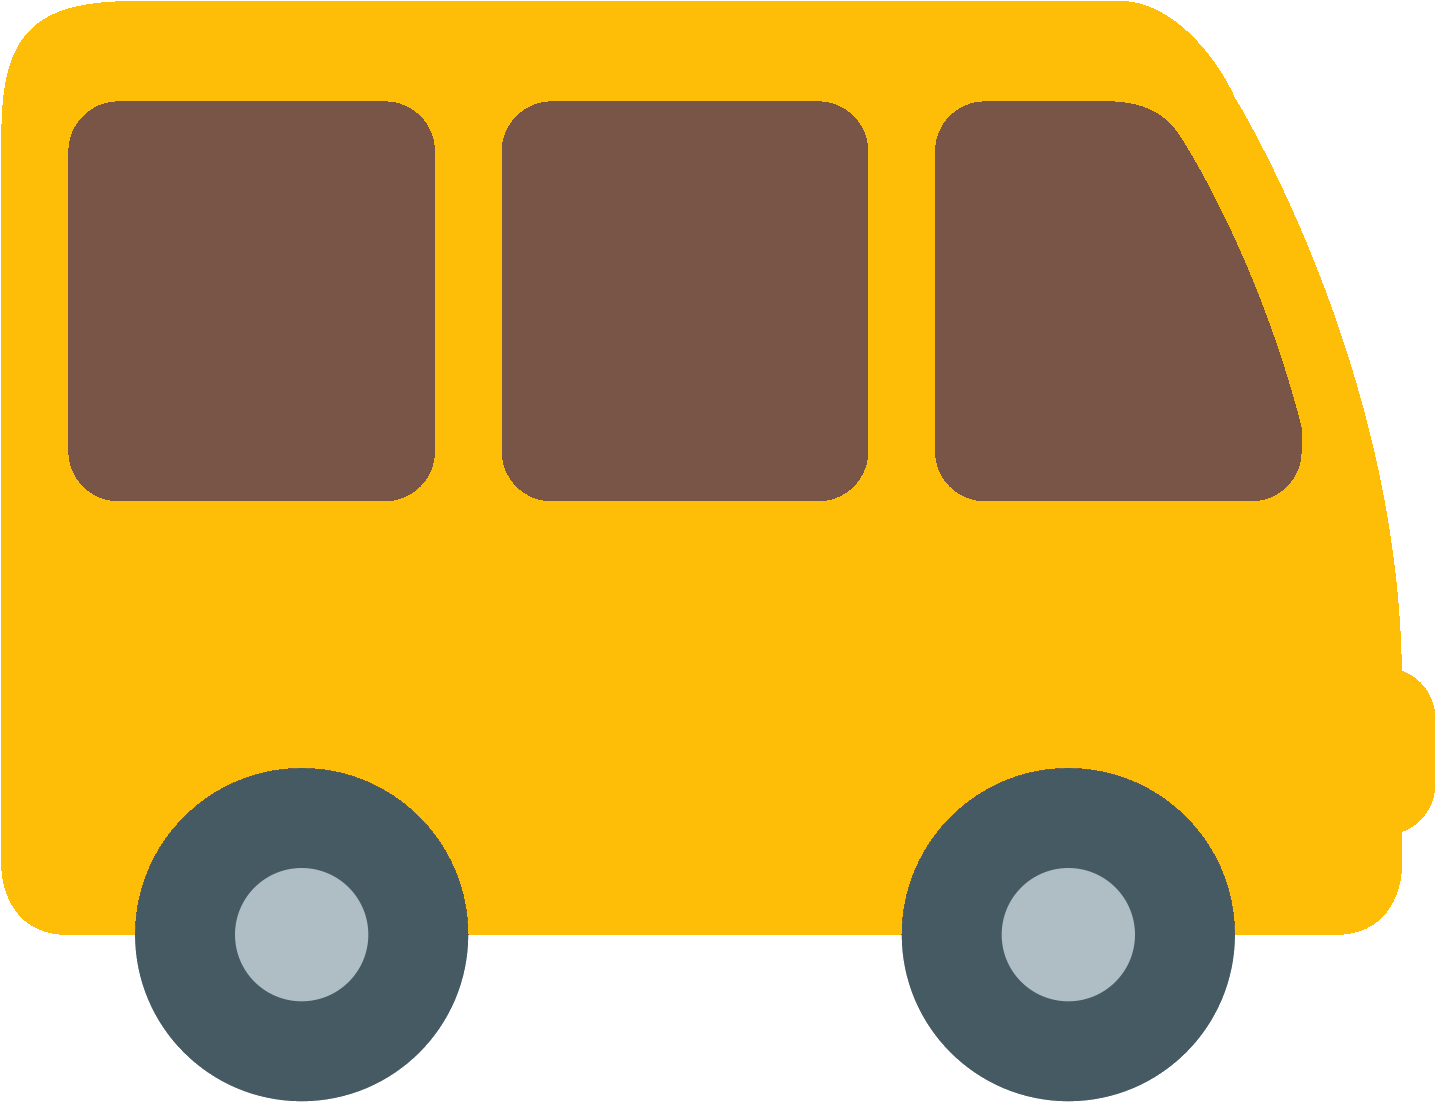 Yellow Cartoon Bus Graphic PNG